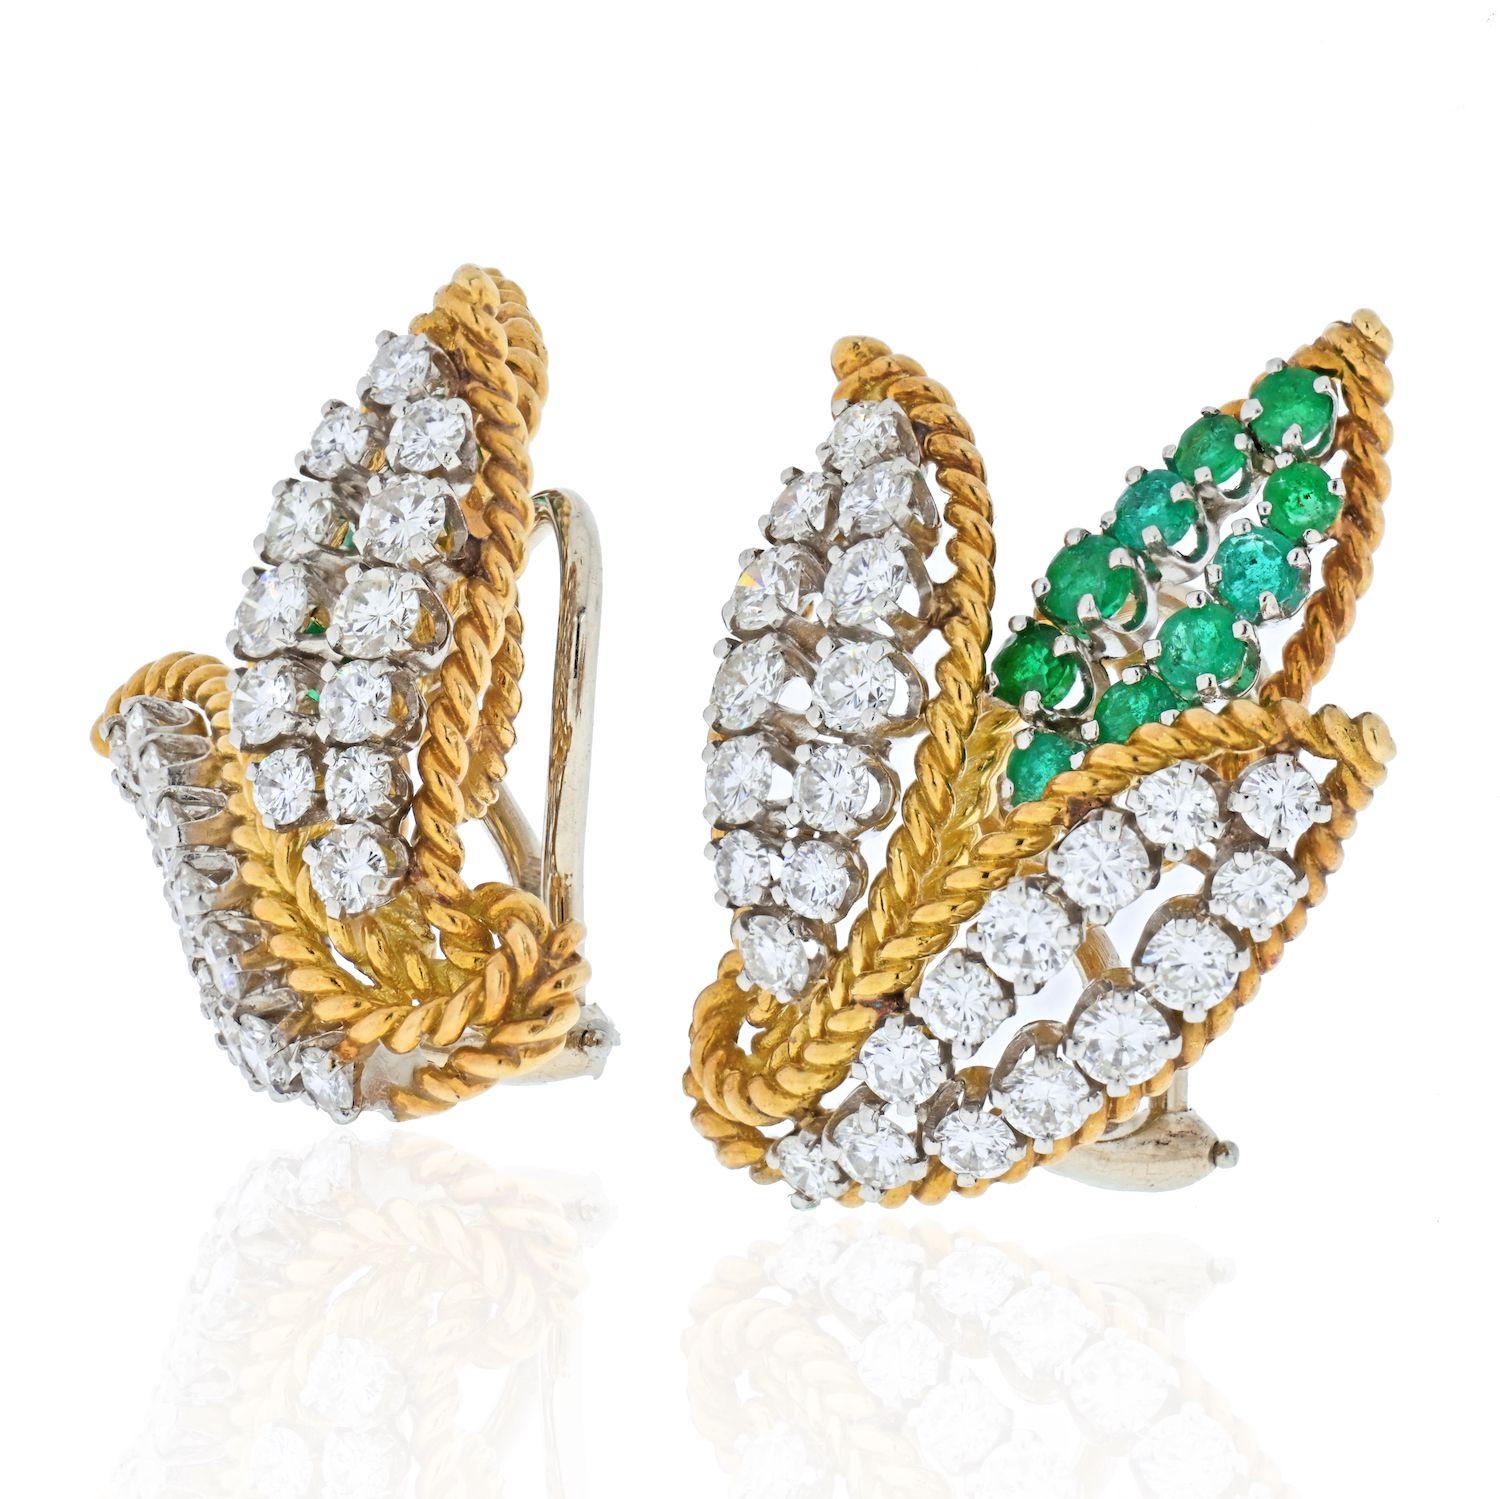 Set with approximately 1.70 carat of green emeralds, highlighted by about 1.30 cts in diamonds, these gold clipback earrings date from the 1970s. Outlined in gold rope-twist, the high relief curling triple leaf motifs feature round cut white